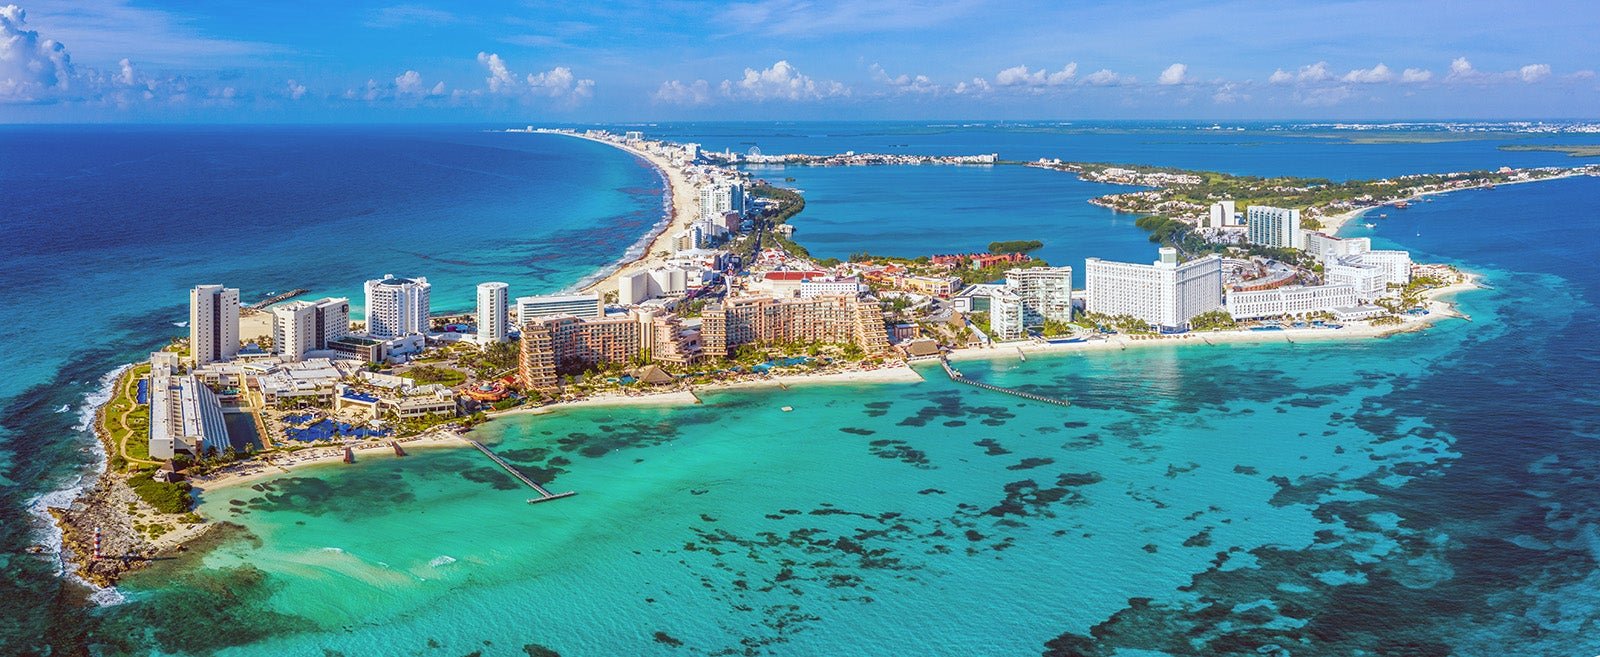 Cancun essentials: Everything you need to plan the perfect Mexico getaway